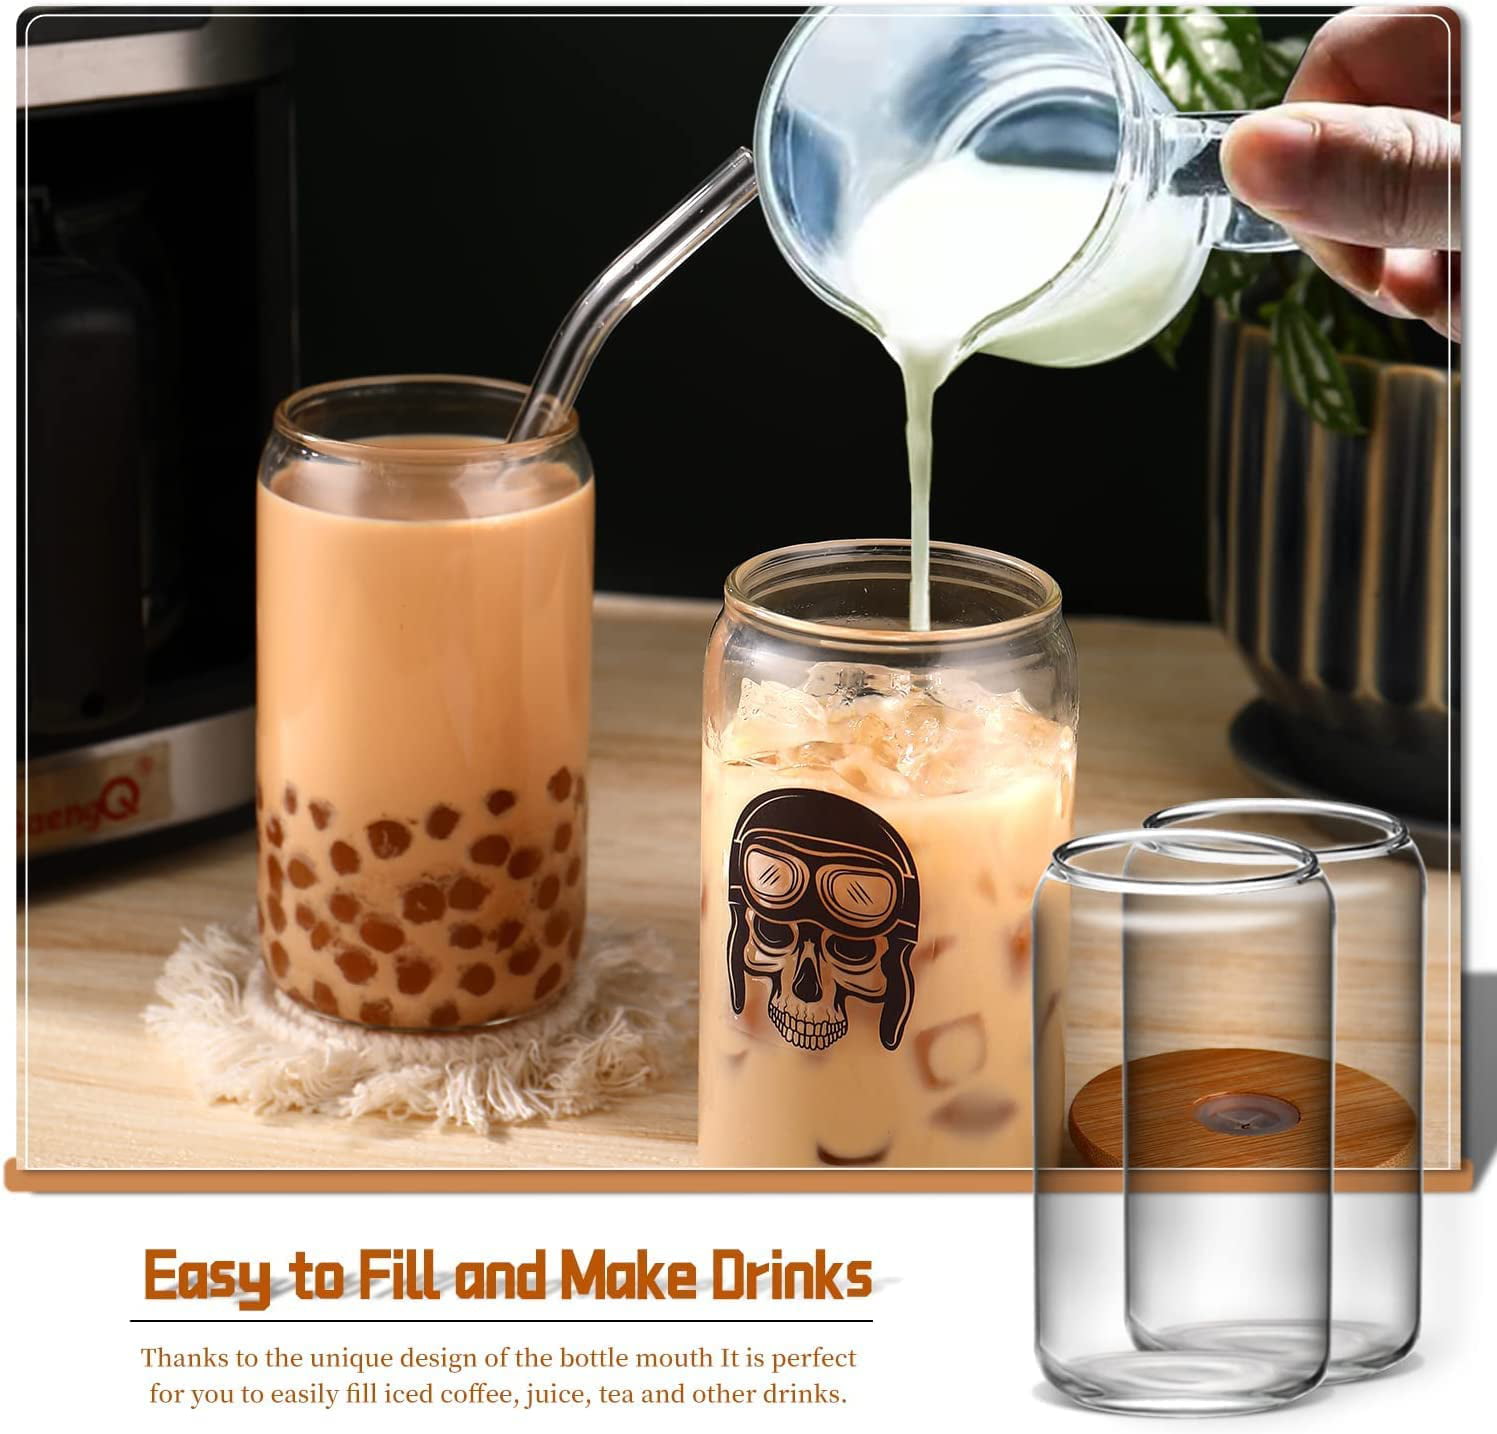 Glass Cups with Lids and Glass Straws with Design 4pcs Set - 16oz Cute Iced  Coffee Sublimation Glass…See more Glass Cups with Lids and Glass Straws